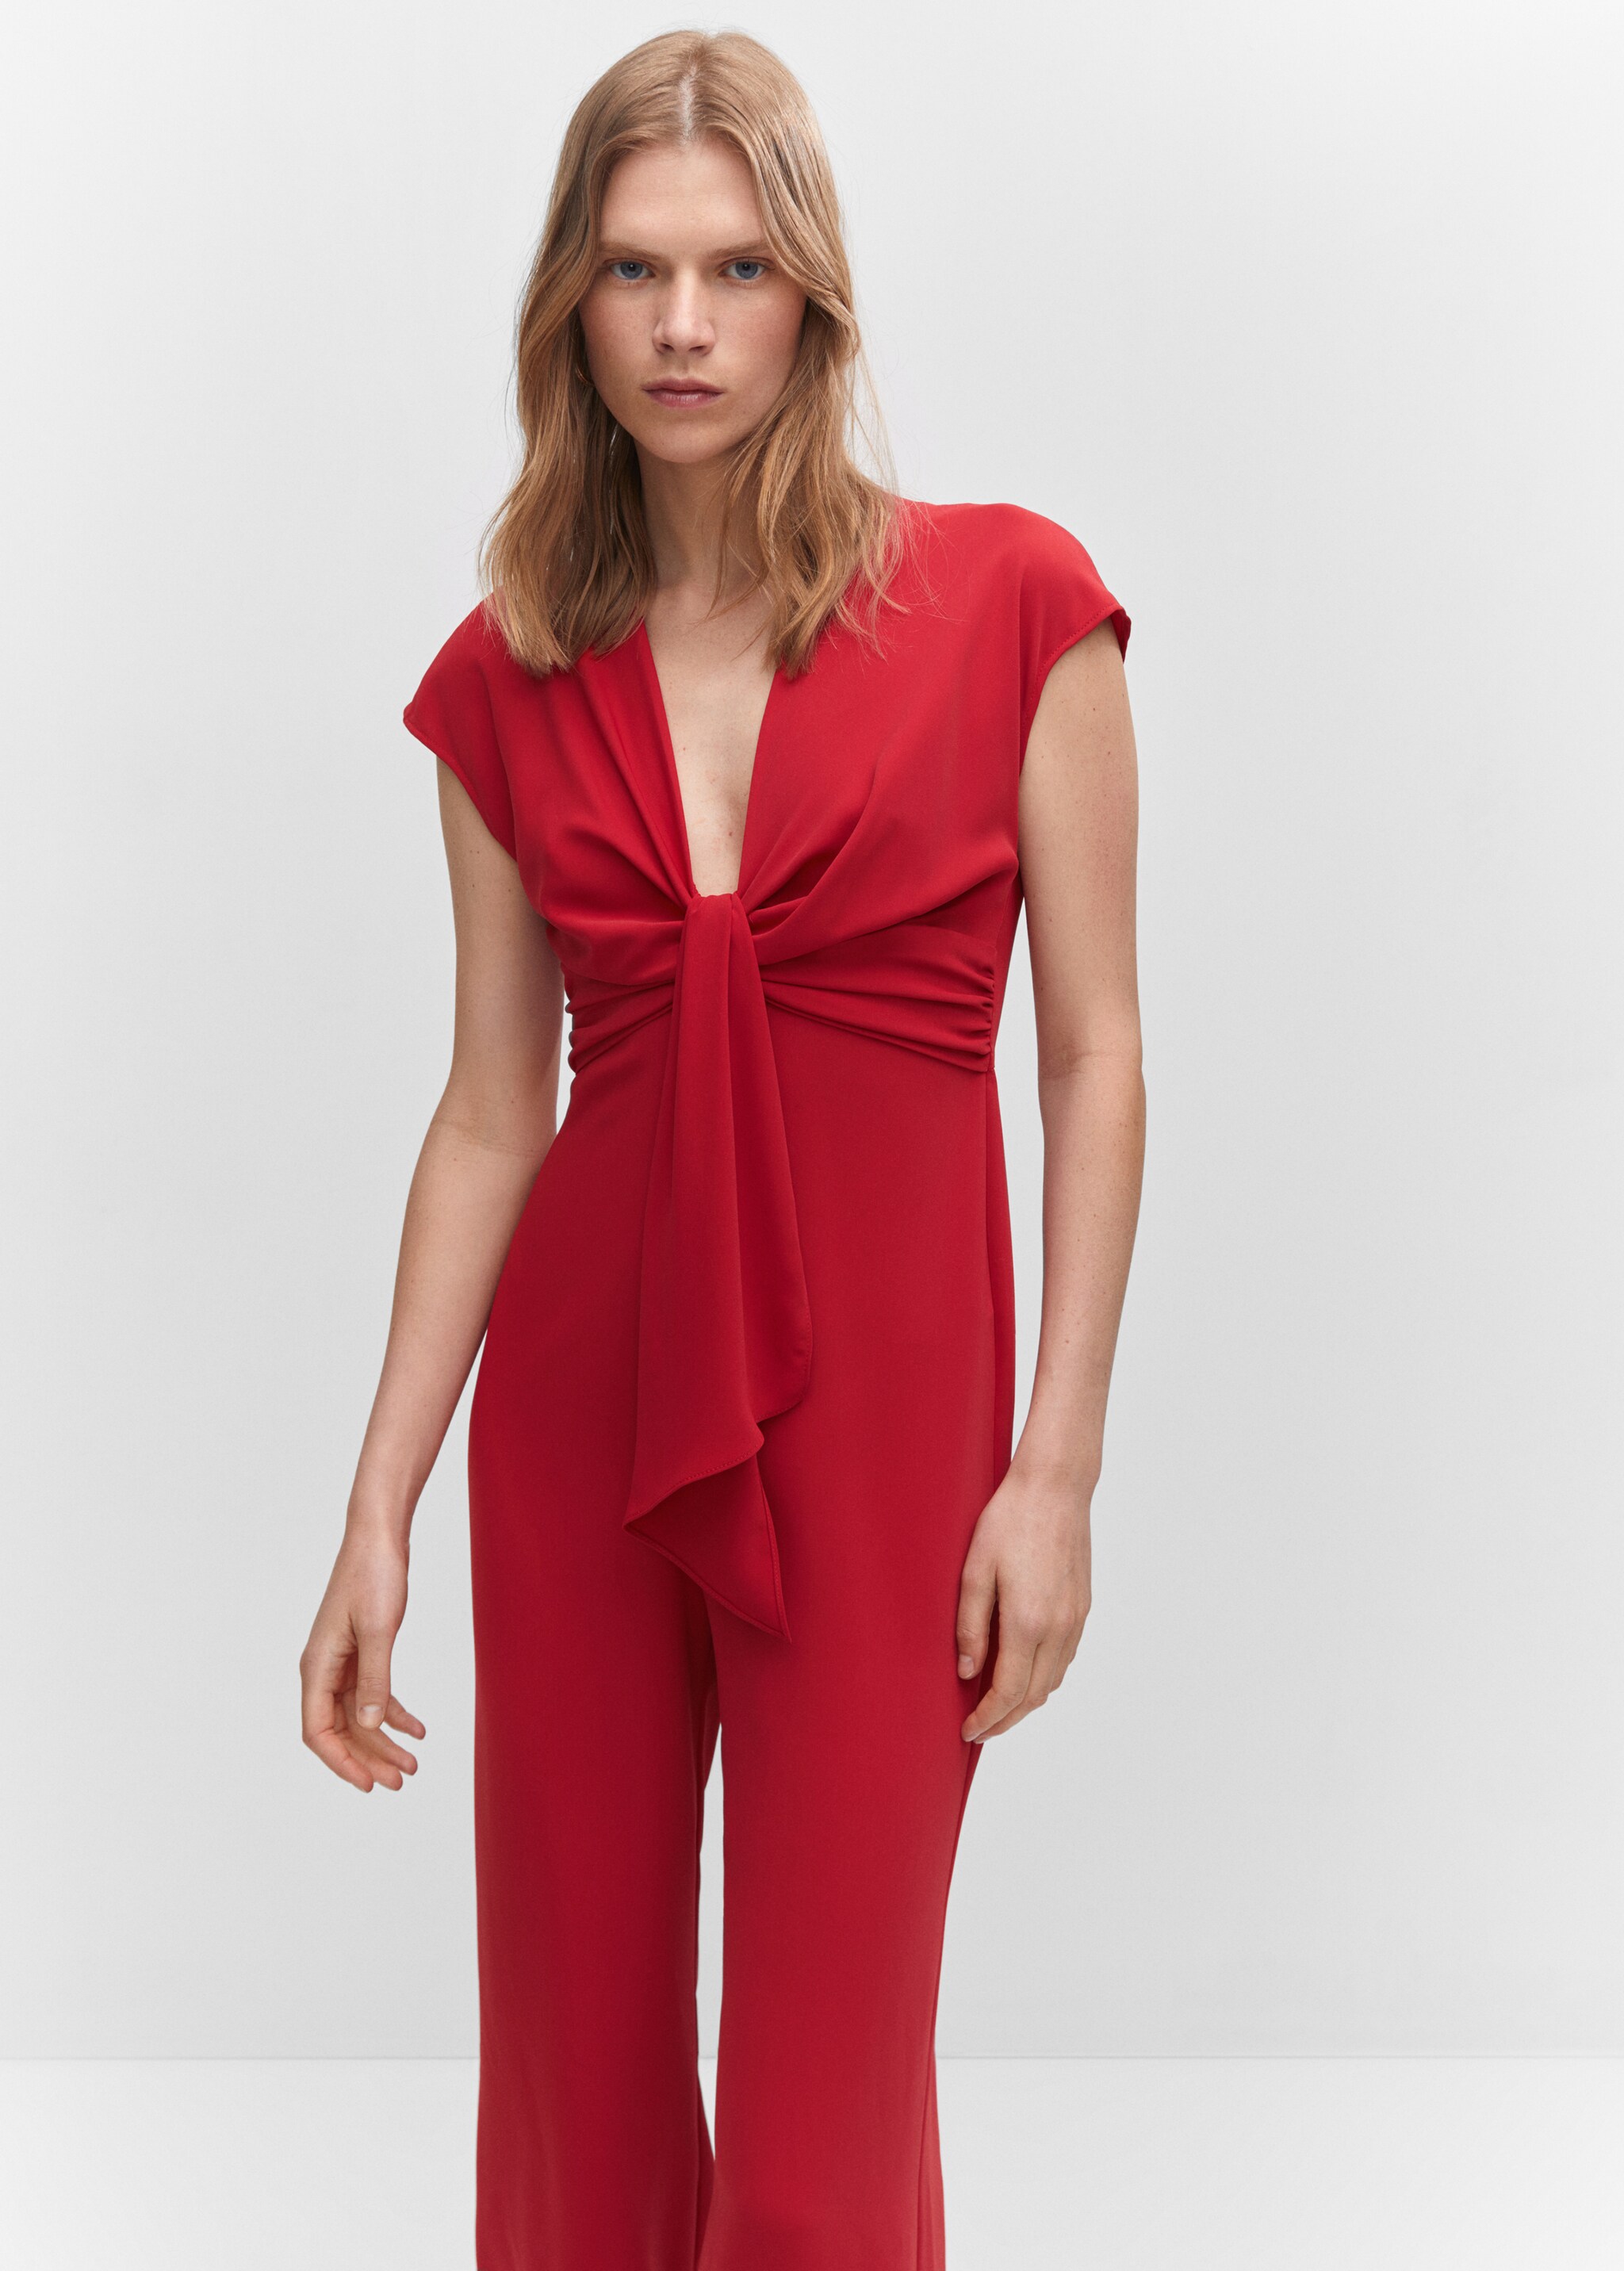 Short-sleeved jumpsuit with knot detail - Medium plane